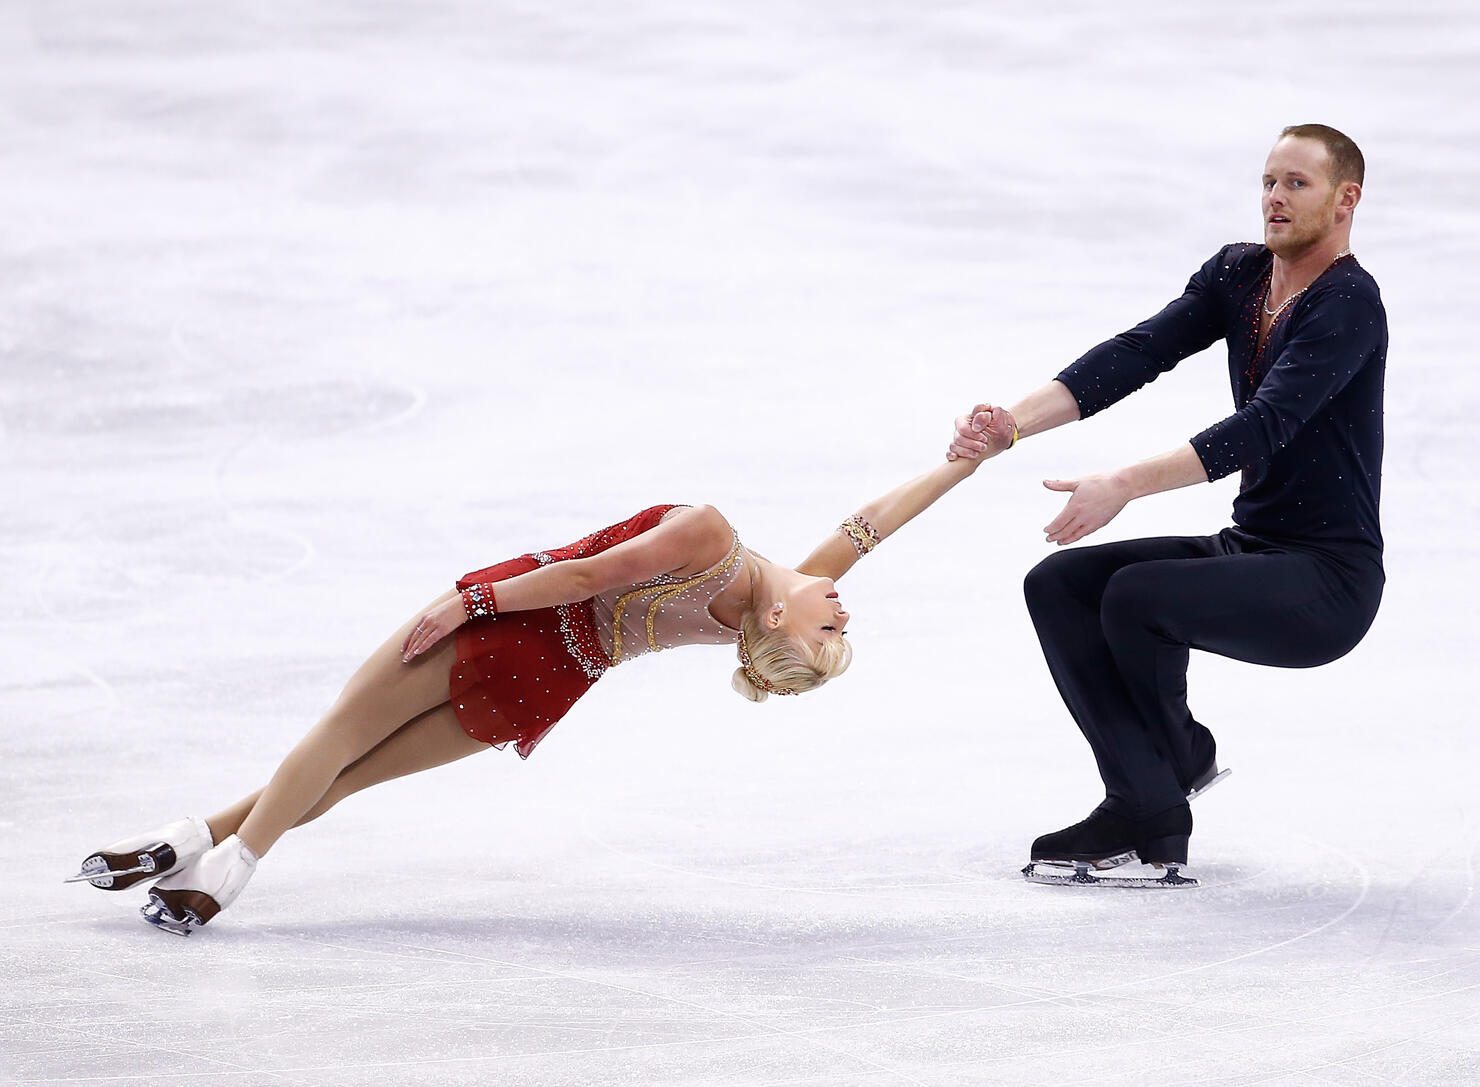 Former U.S. skater John Coughlin was facing reports of sexual misconduct before his death